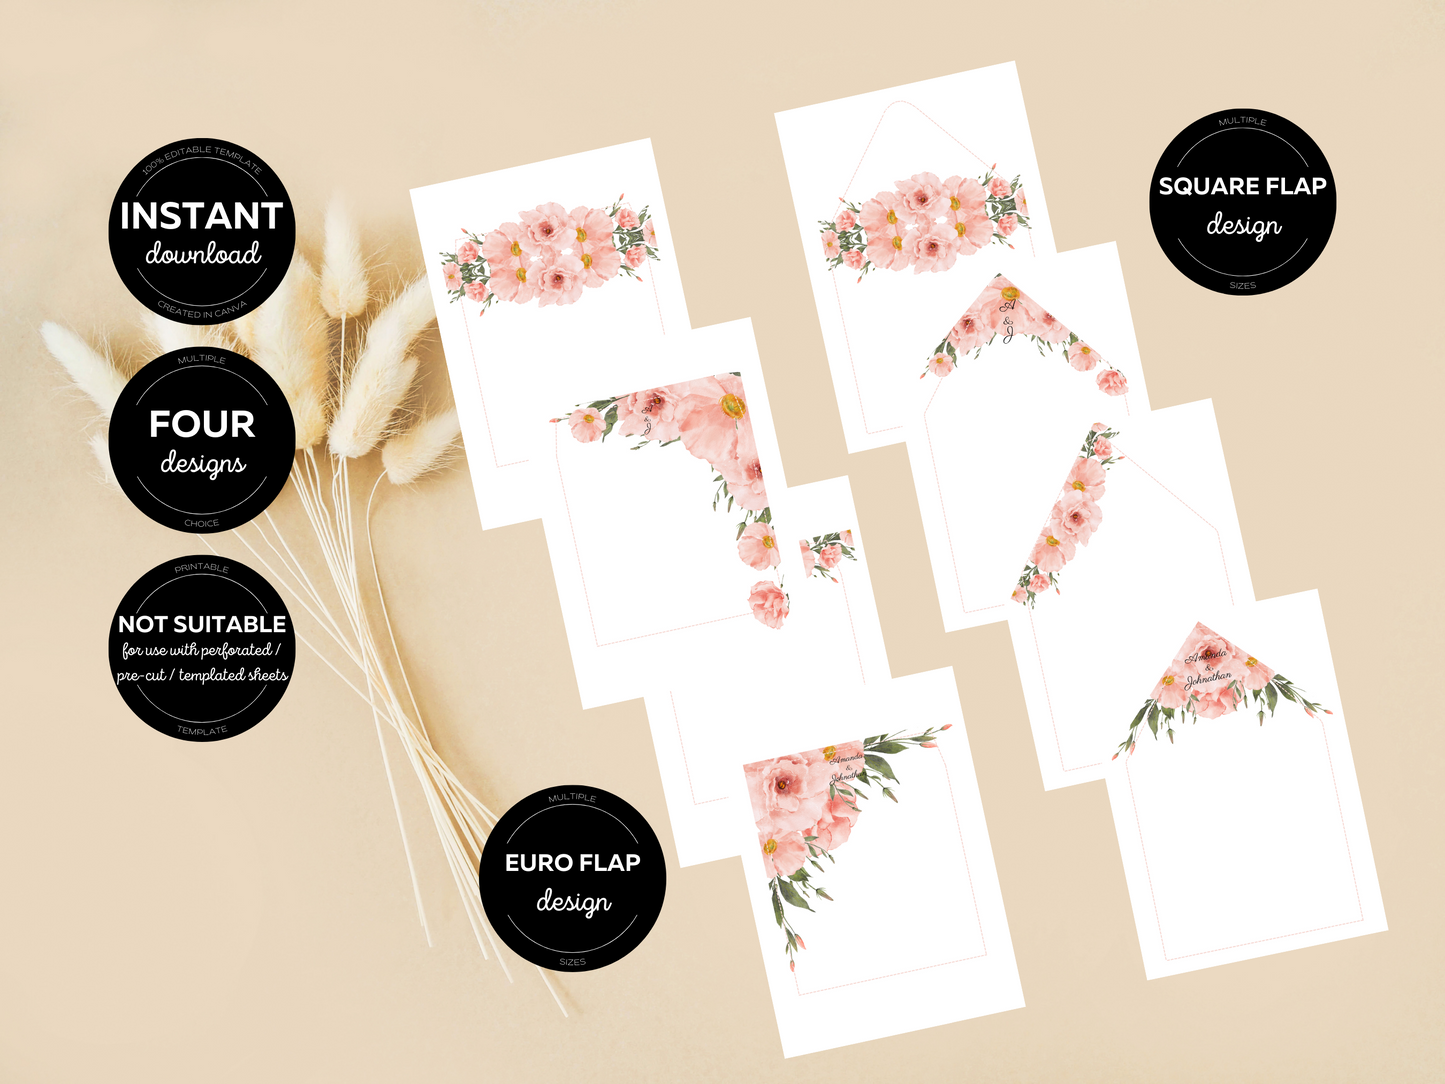 Soft Pink Floral Wedding Invitation Suite with Envelope Decoration Templates, Printable Templates